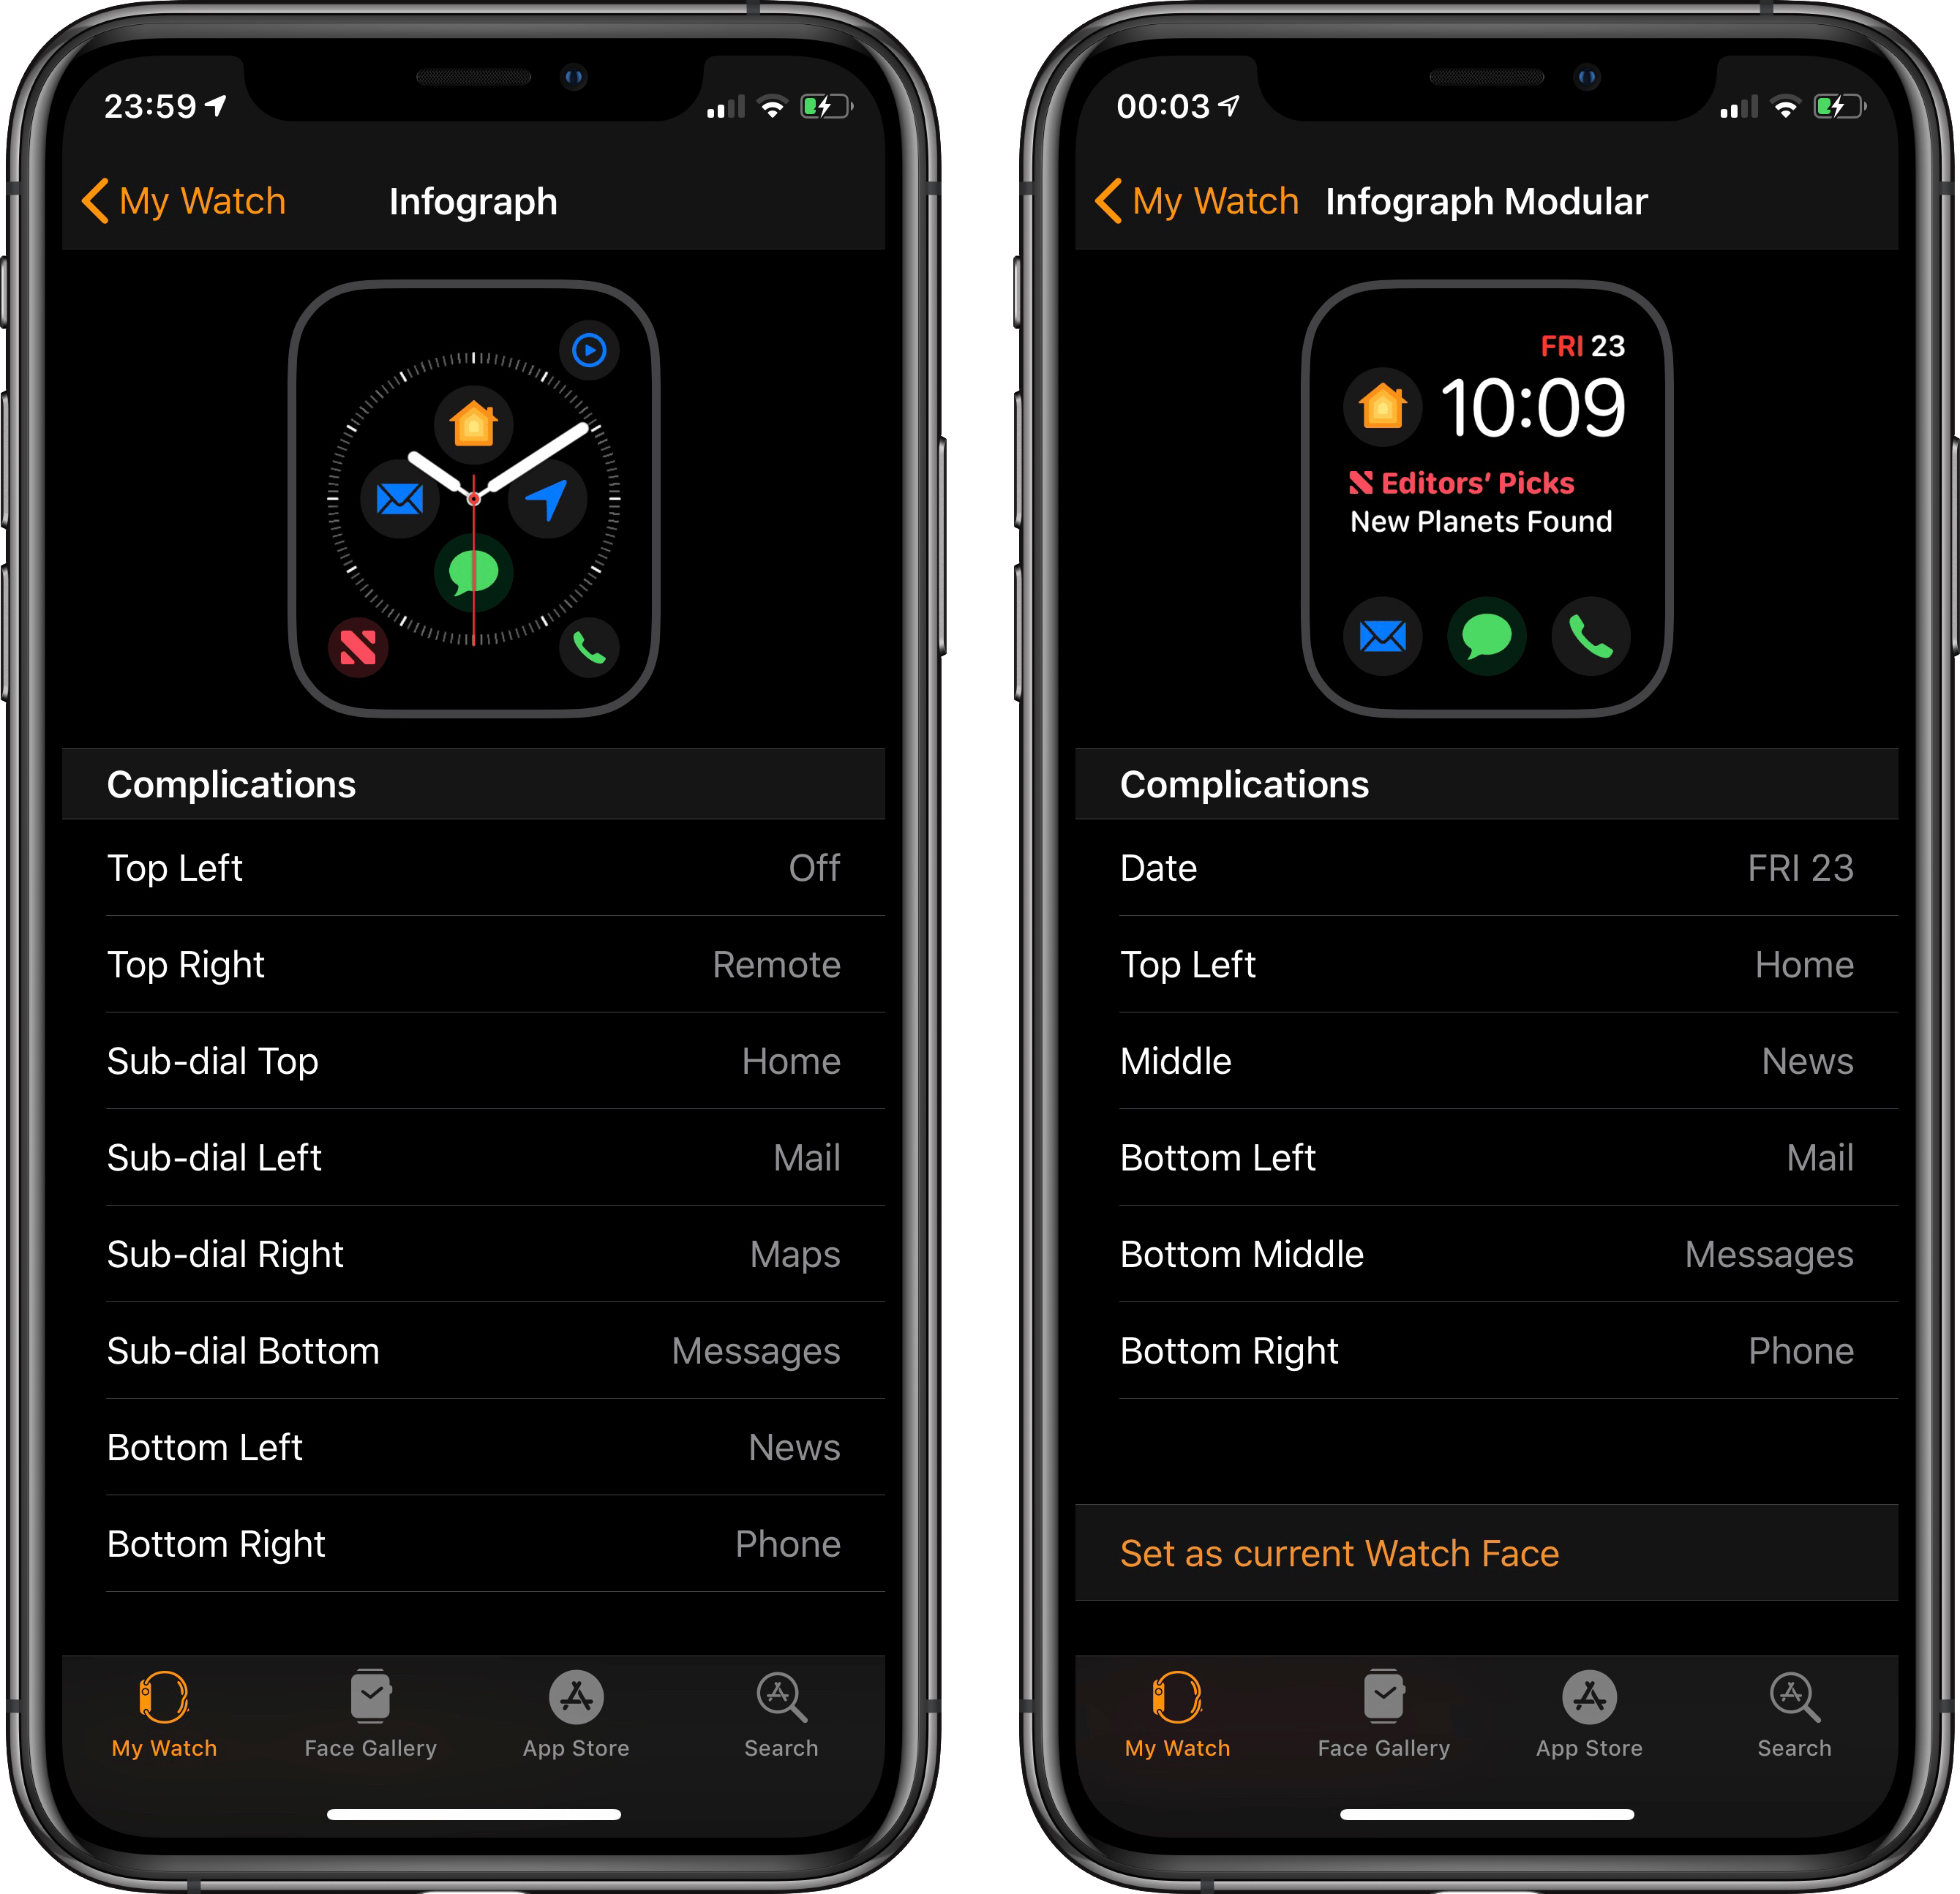 New complications for Apple Watch Series 4